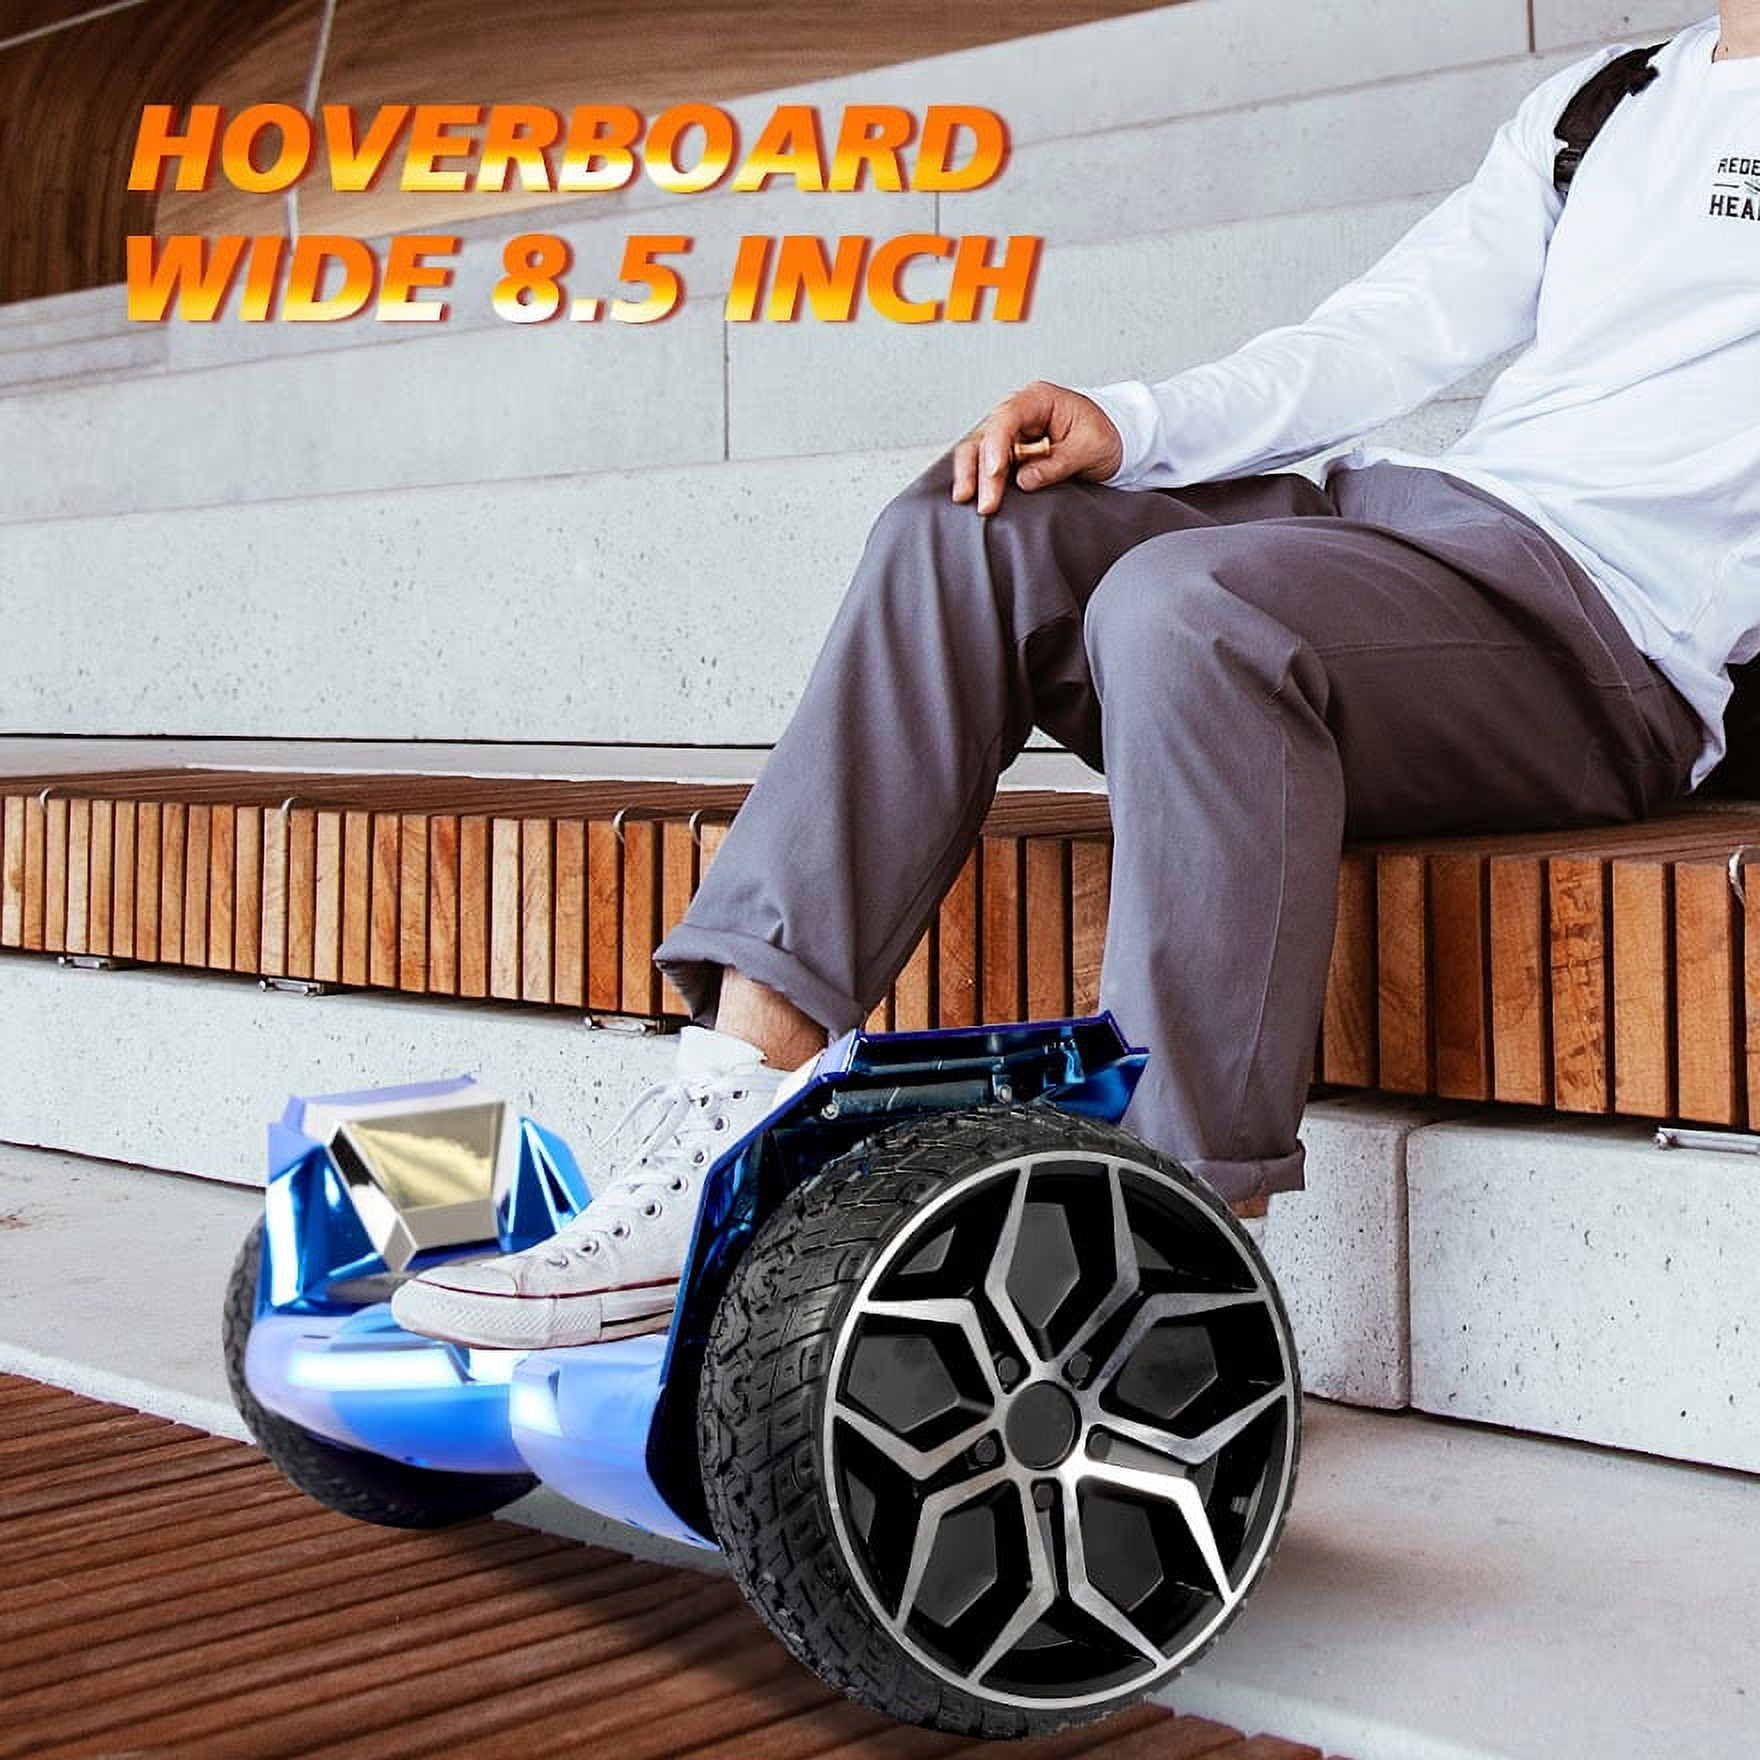 8.5 Bluetooth Hoverboard, 500W Auto Balancing scooter with Metal Wheels,  LED Lights and Wireless Speaker 